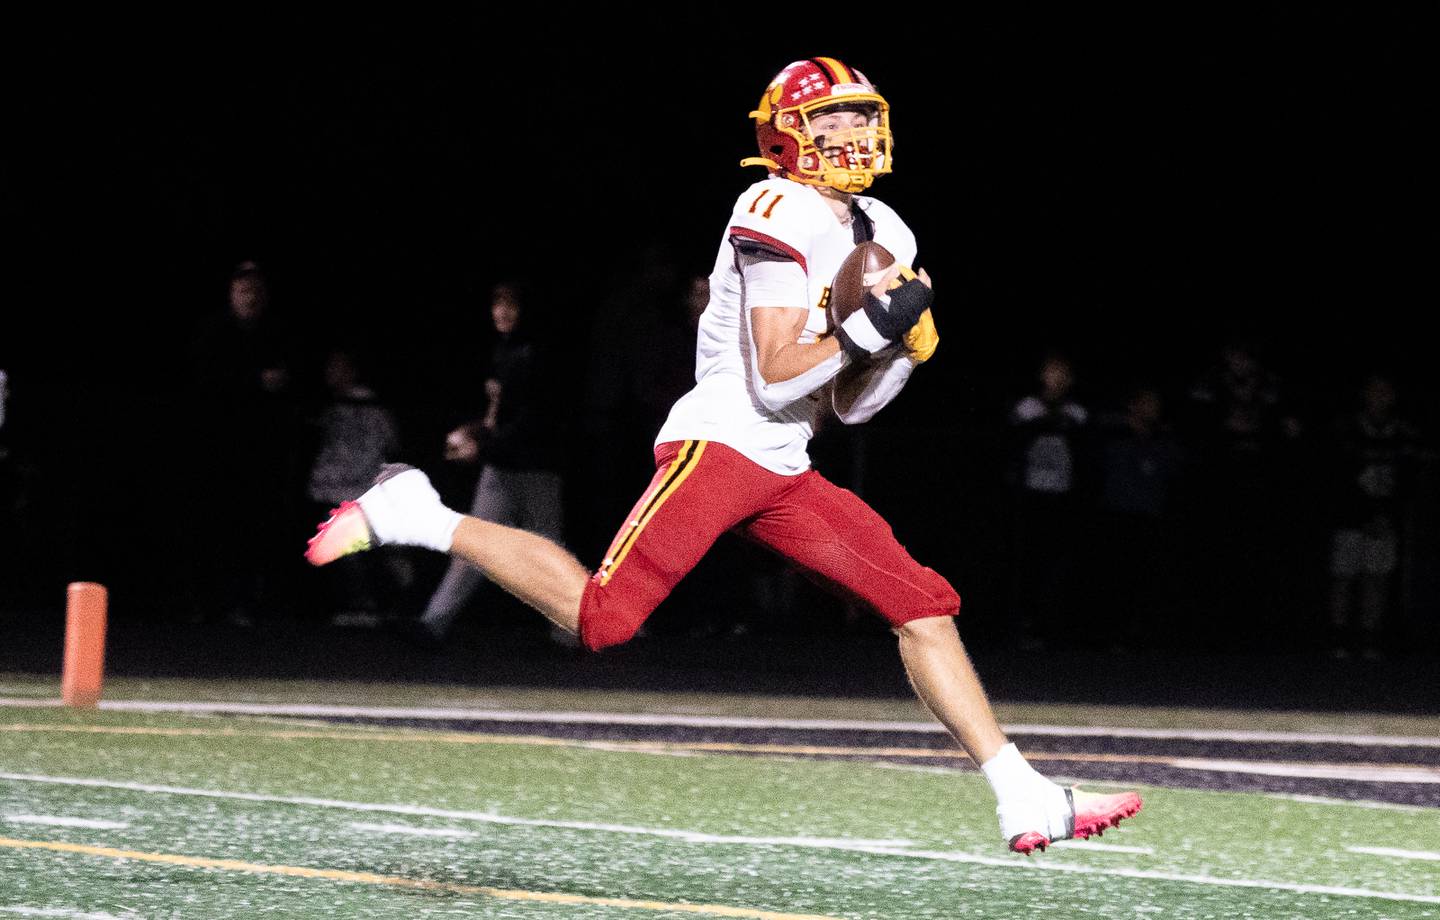 Batavia’s Gerke Drew (11) catches a pass for a touchdown against Glenbard North during a football game at Glenbard North High School in Carol Stream on Friday, Sep 23, 2022.